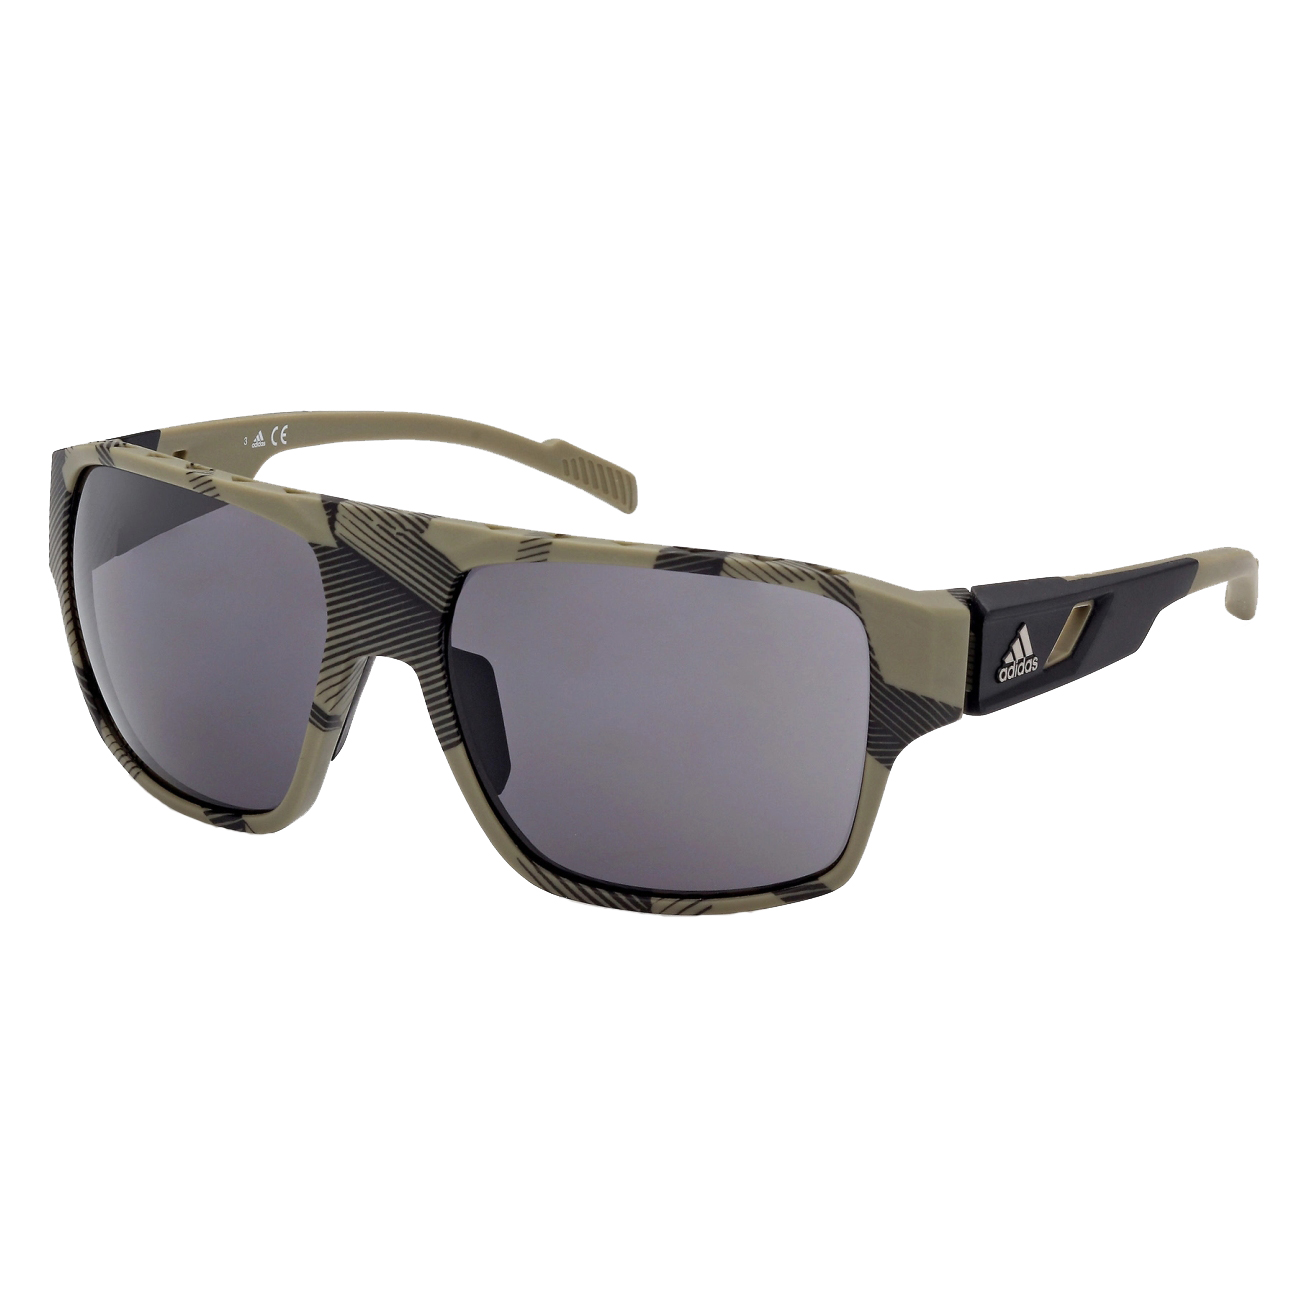 Image of adidas Actv Classic SP0046 Sport Sunglasses - Light Green/Other / Contrast Smoke